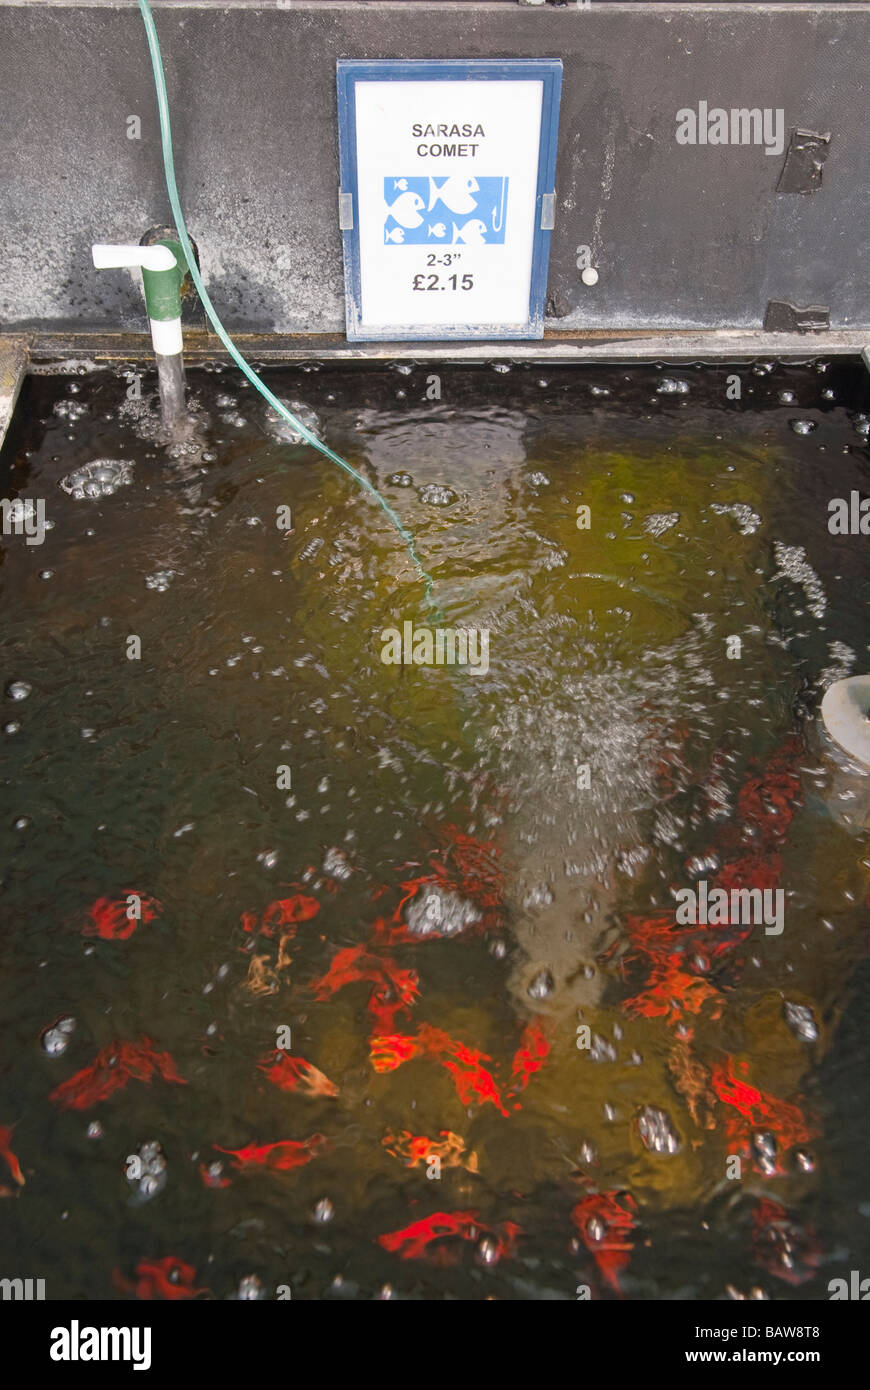 Sarasa Comet Goldfish for sale at a uk garden centre for your pond Stock Photo